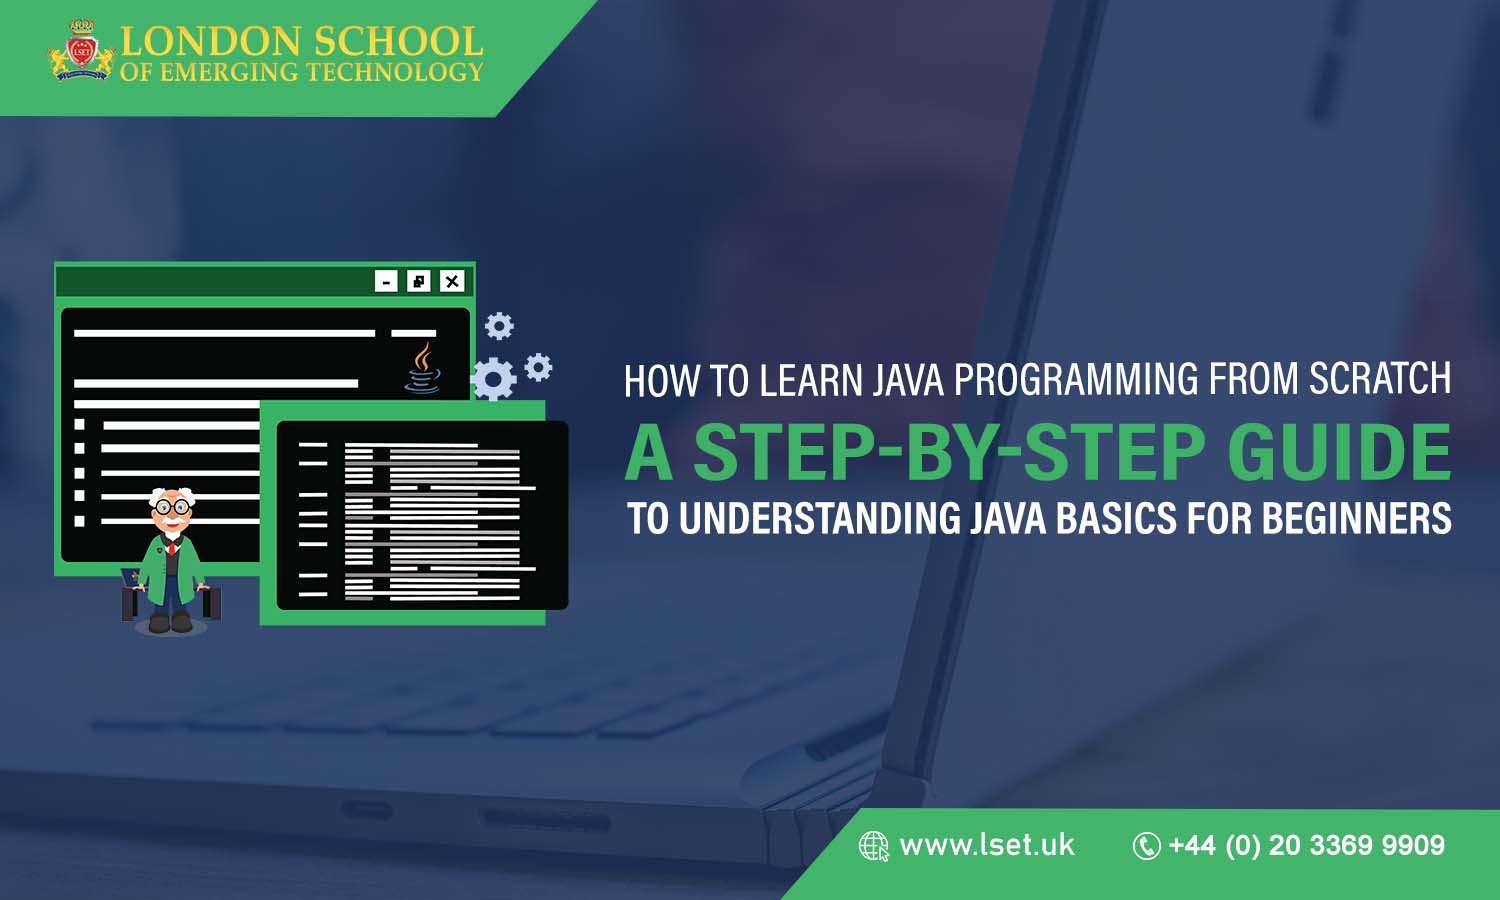 How to Learn Java Programming from Scratch A Step-by-Step Guide to Understanding Java Basics for Beginners